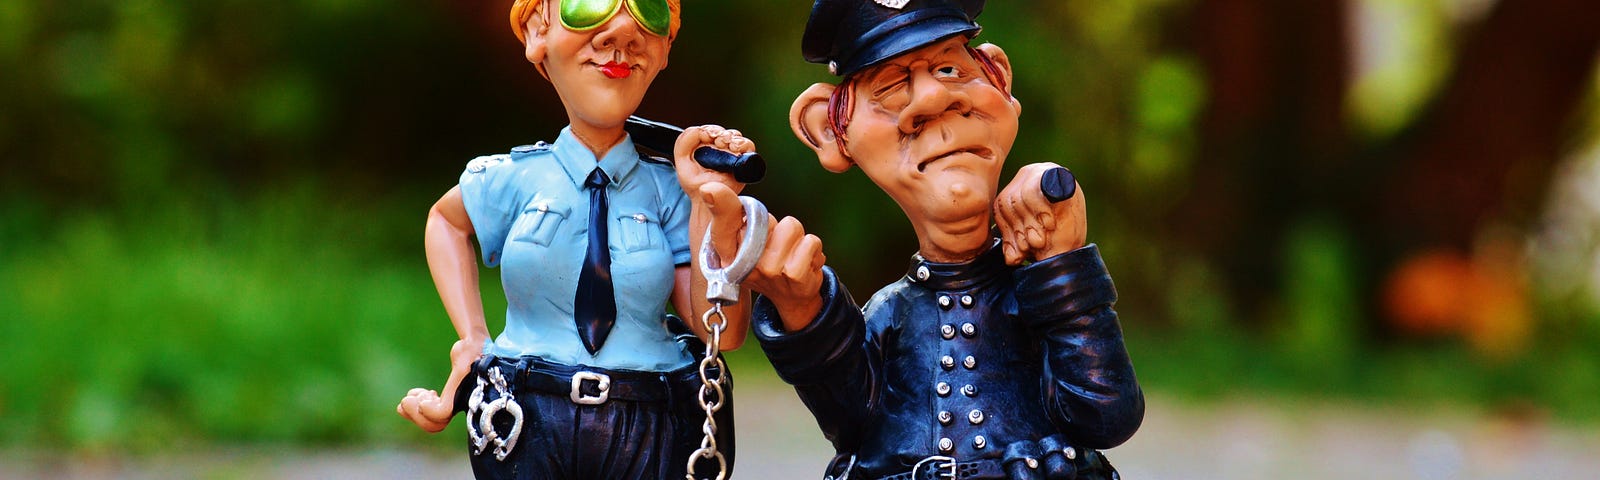 Clay figurines of police officers.